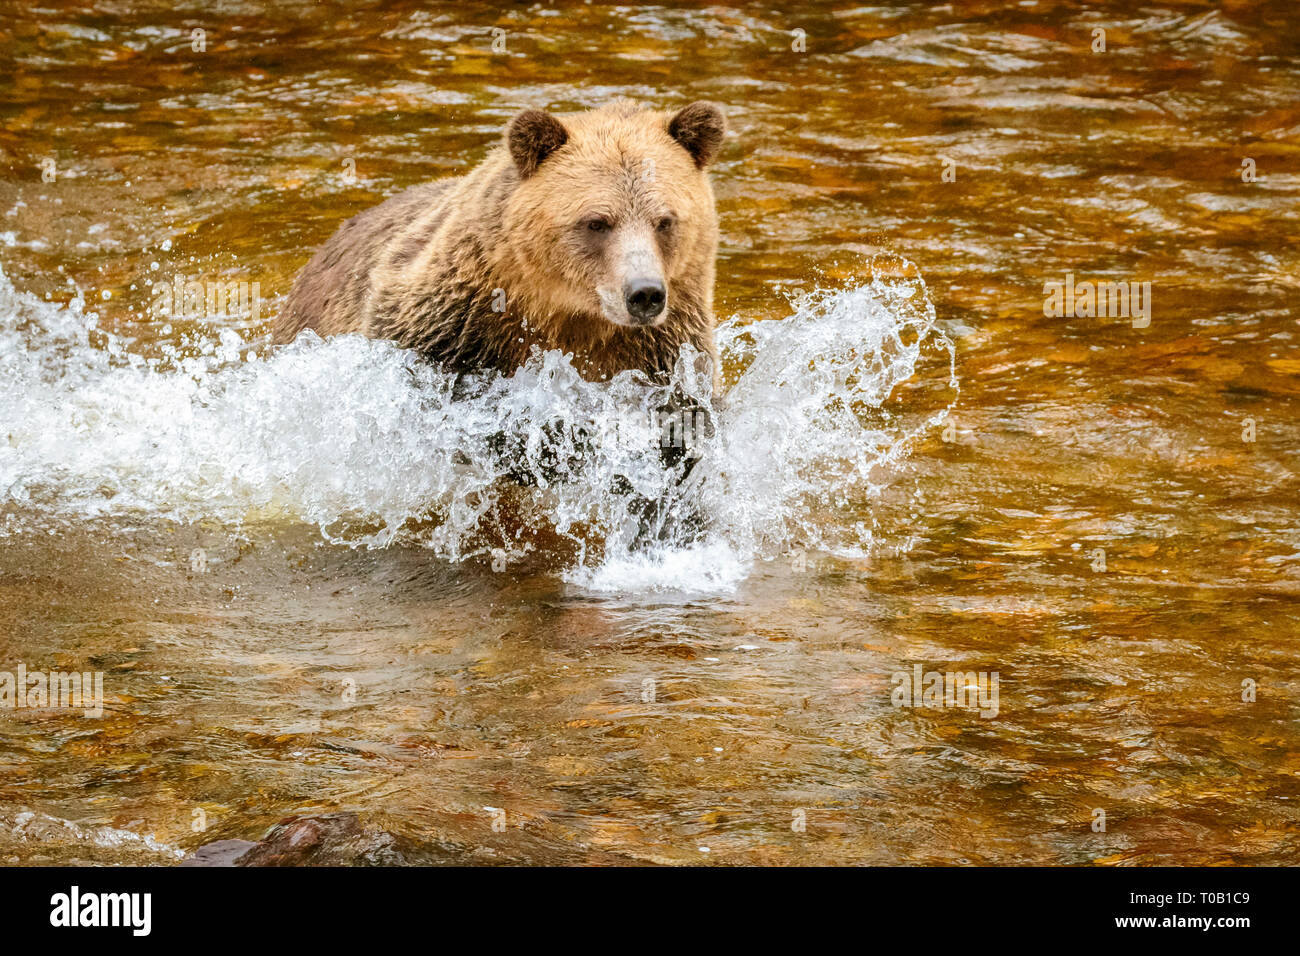 Grizzly Bear, or North American brown bear, Ursus arctos horribilis, hunting for salmon in river, Knight Inlet, British Columbia, Canada Stock Photo